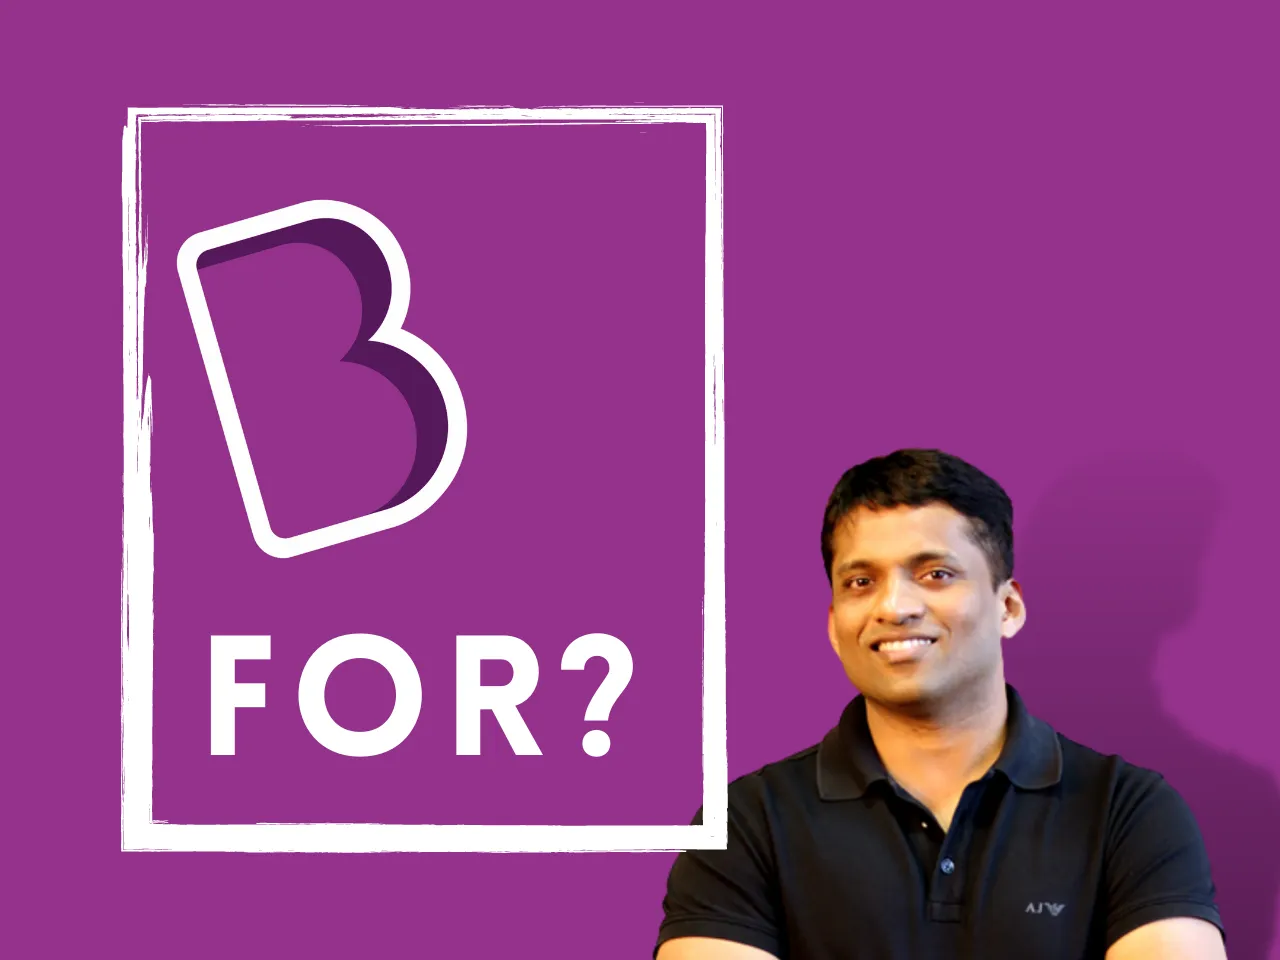 Byju's $700M Fundraise: Lessons Beyond Byju's Course